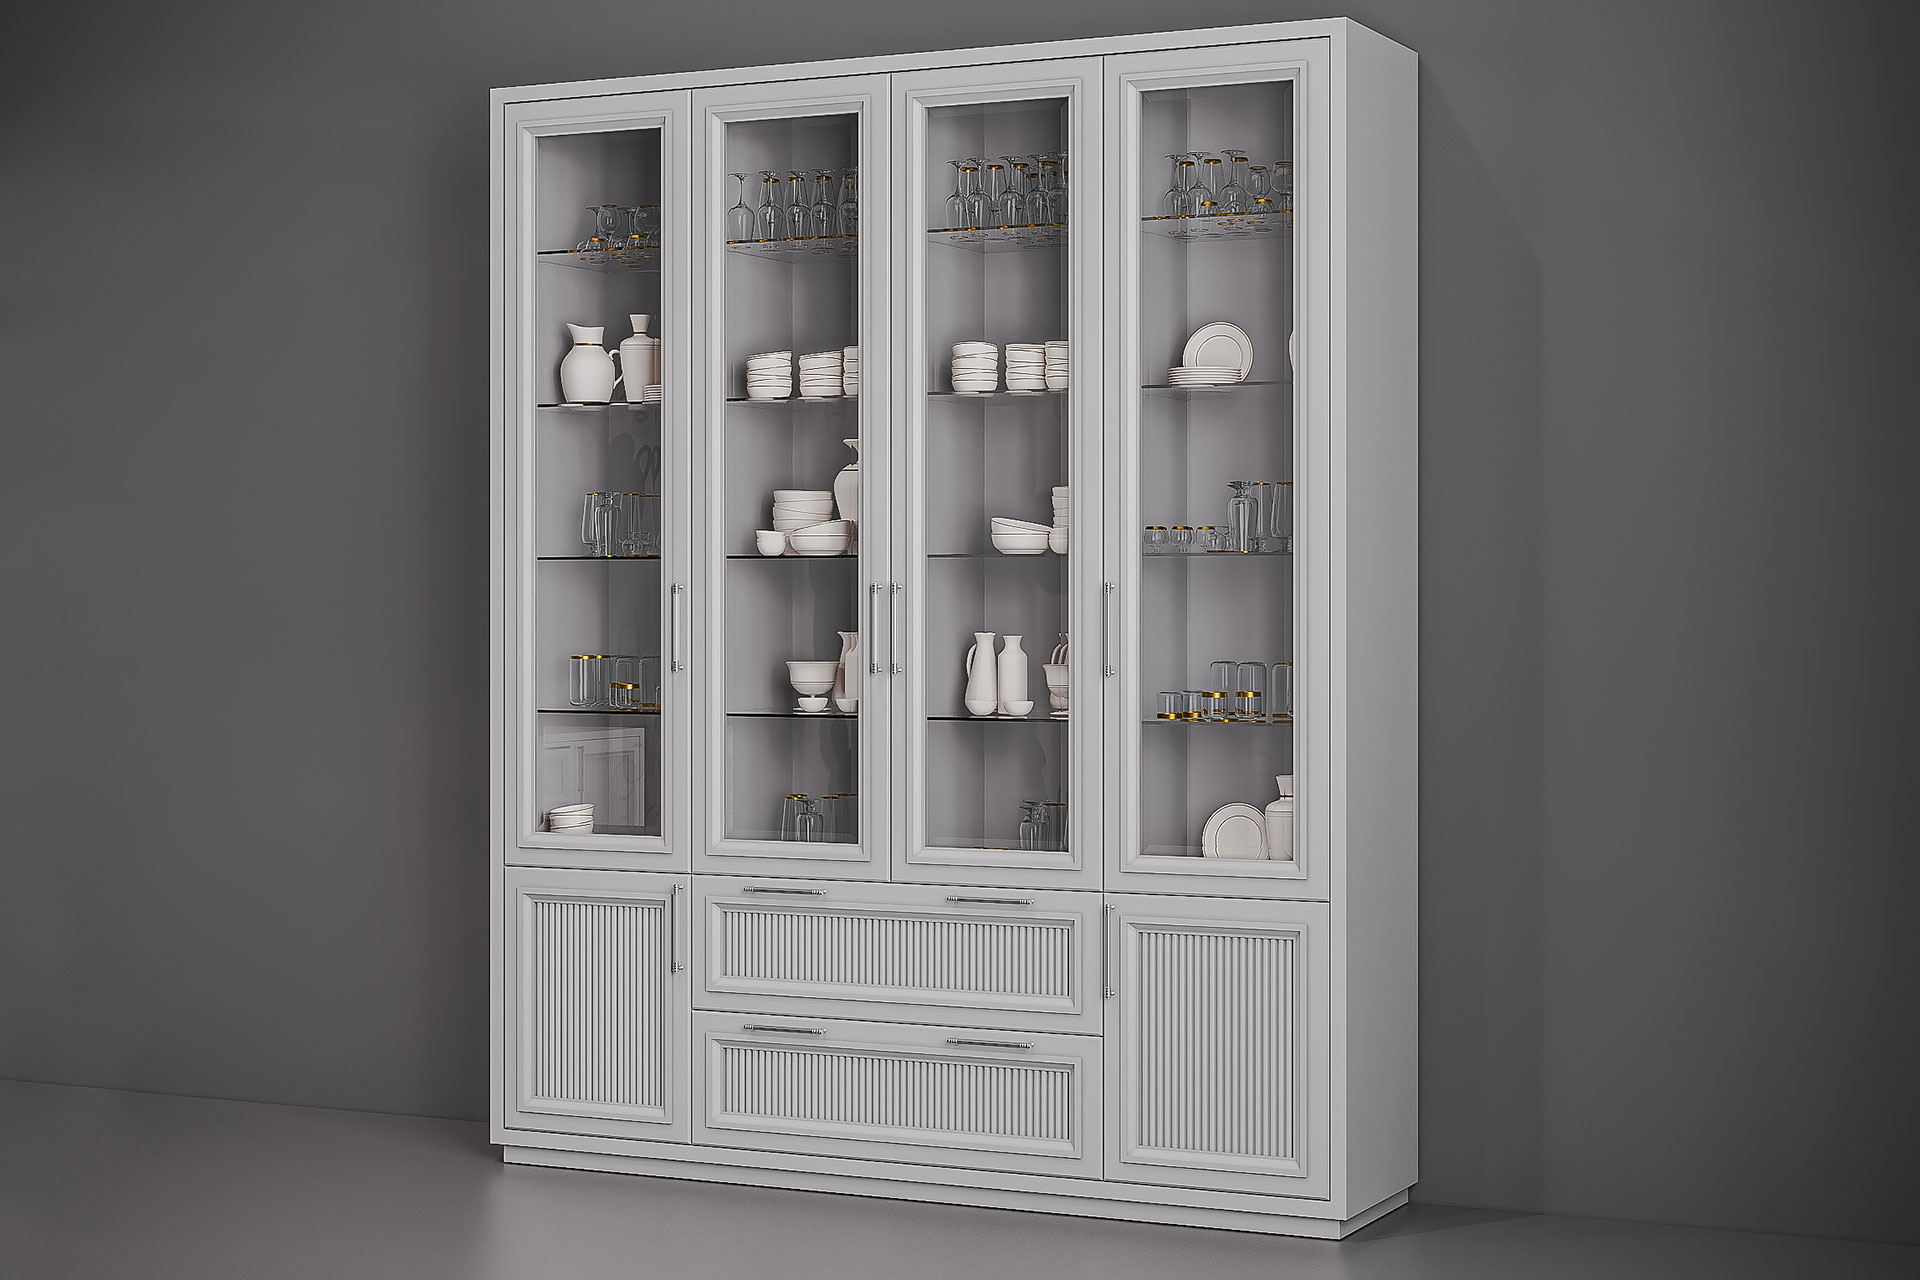 Wooden showcase for the kitchen of the Manhattan collection